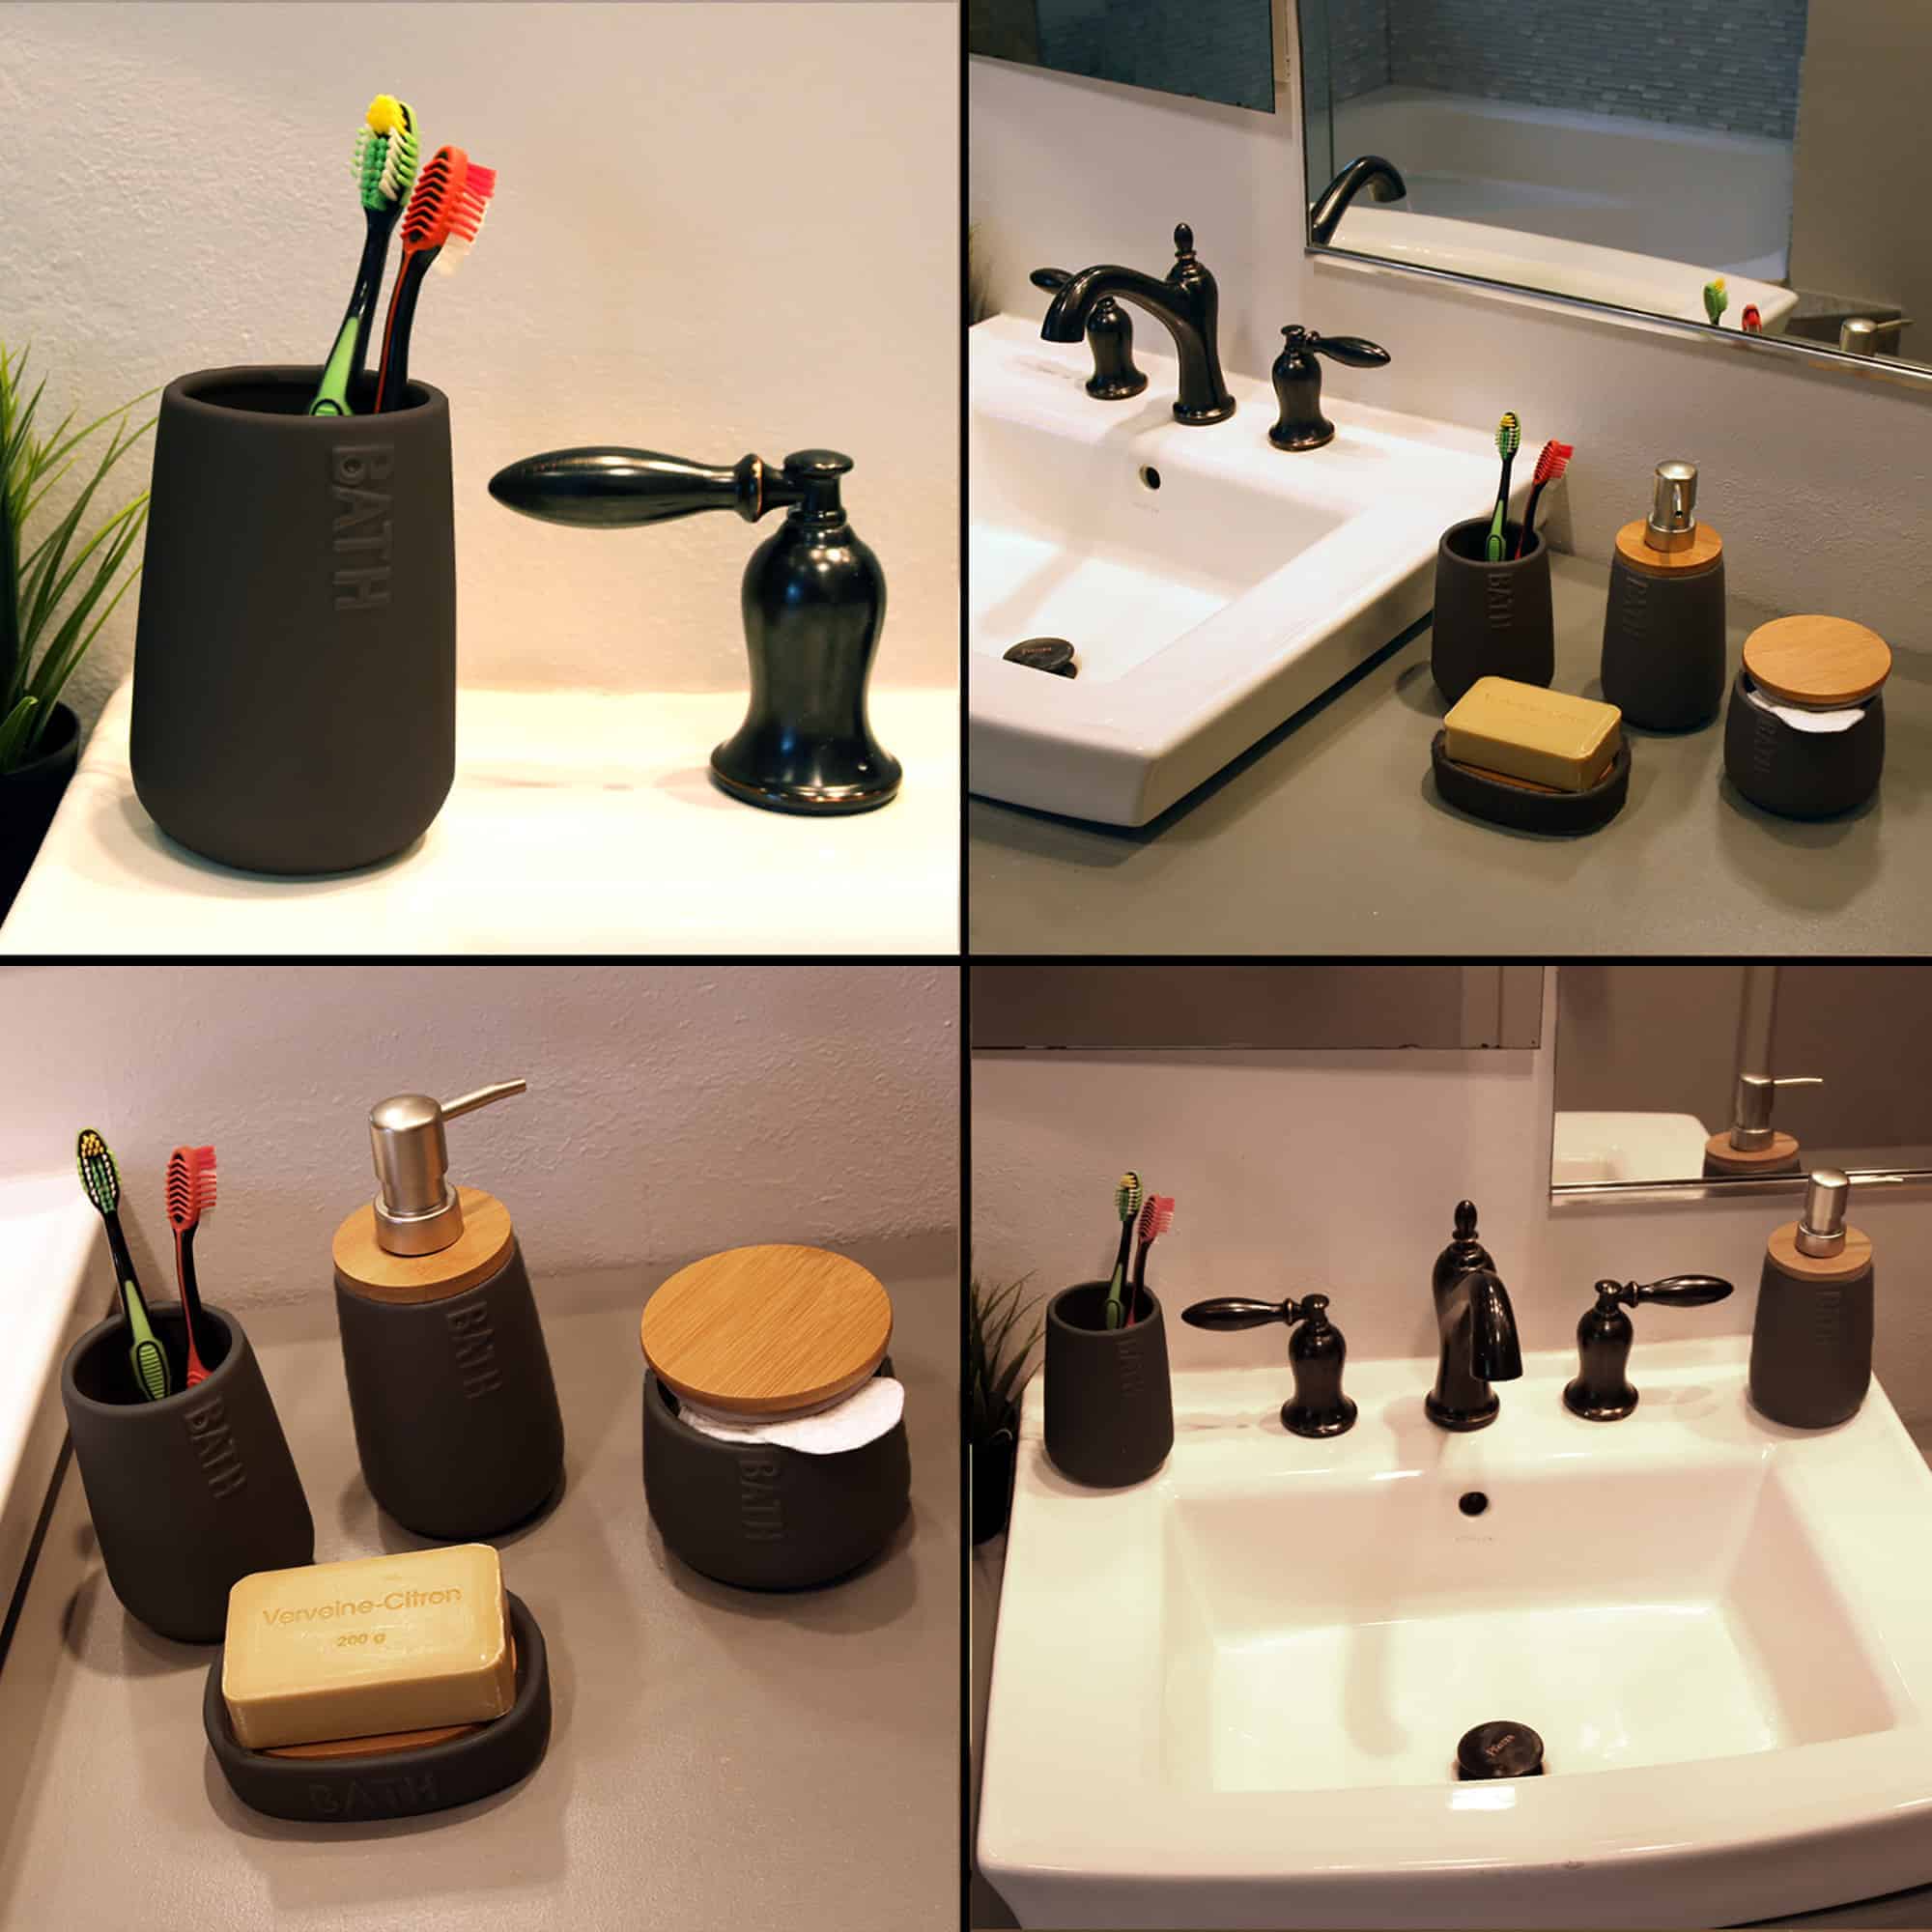 Bath D Dolomite Round Toilet Bowl Brush and Holder Black-Bamboo Top